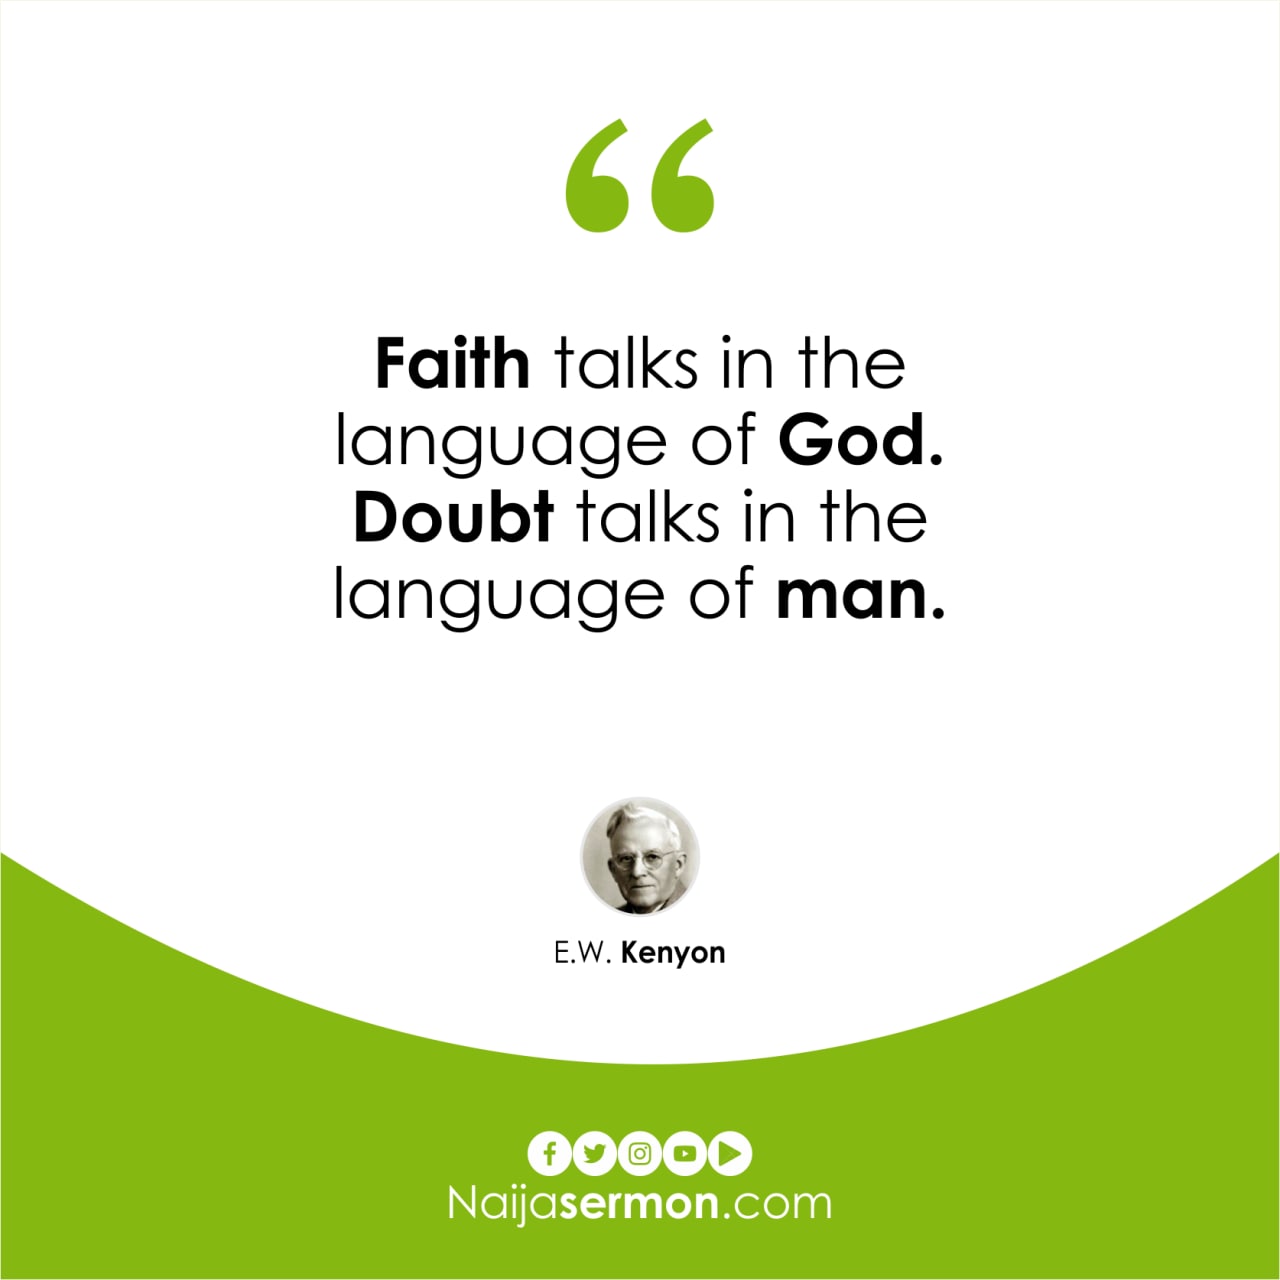 QUOTE OF THE DAY BY E.W. KENYON 1